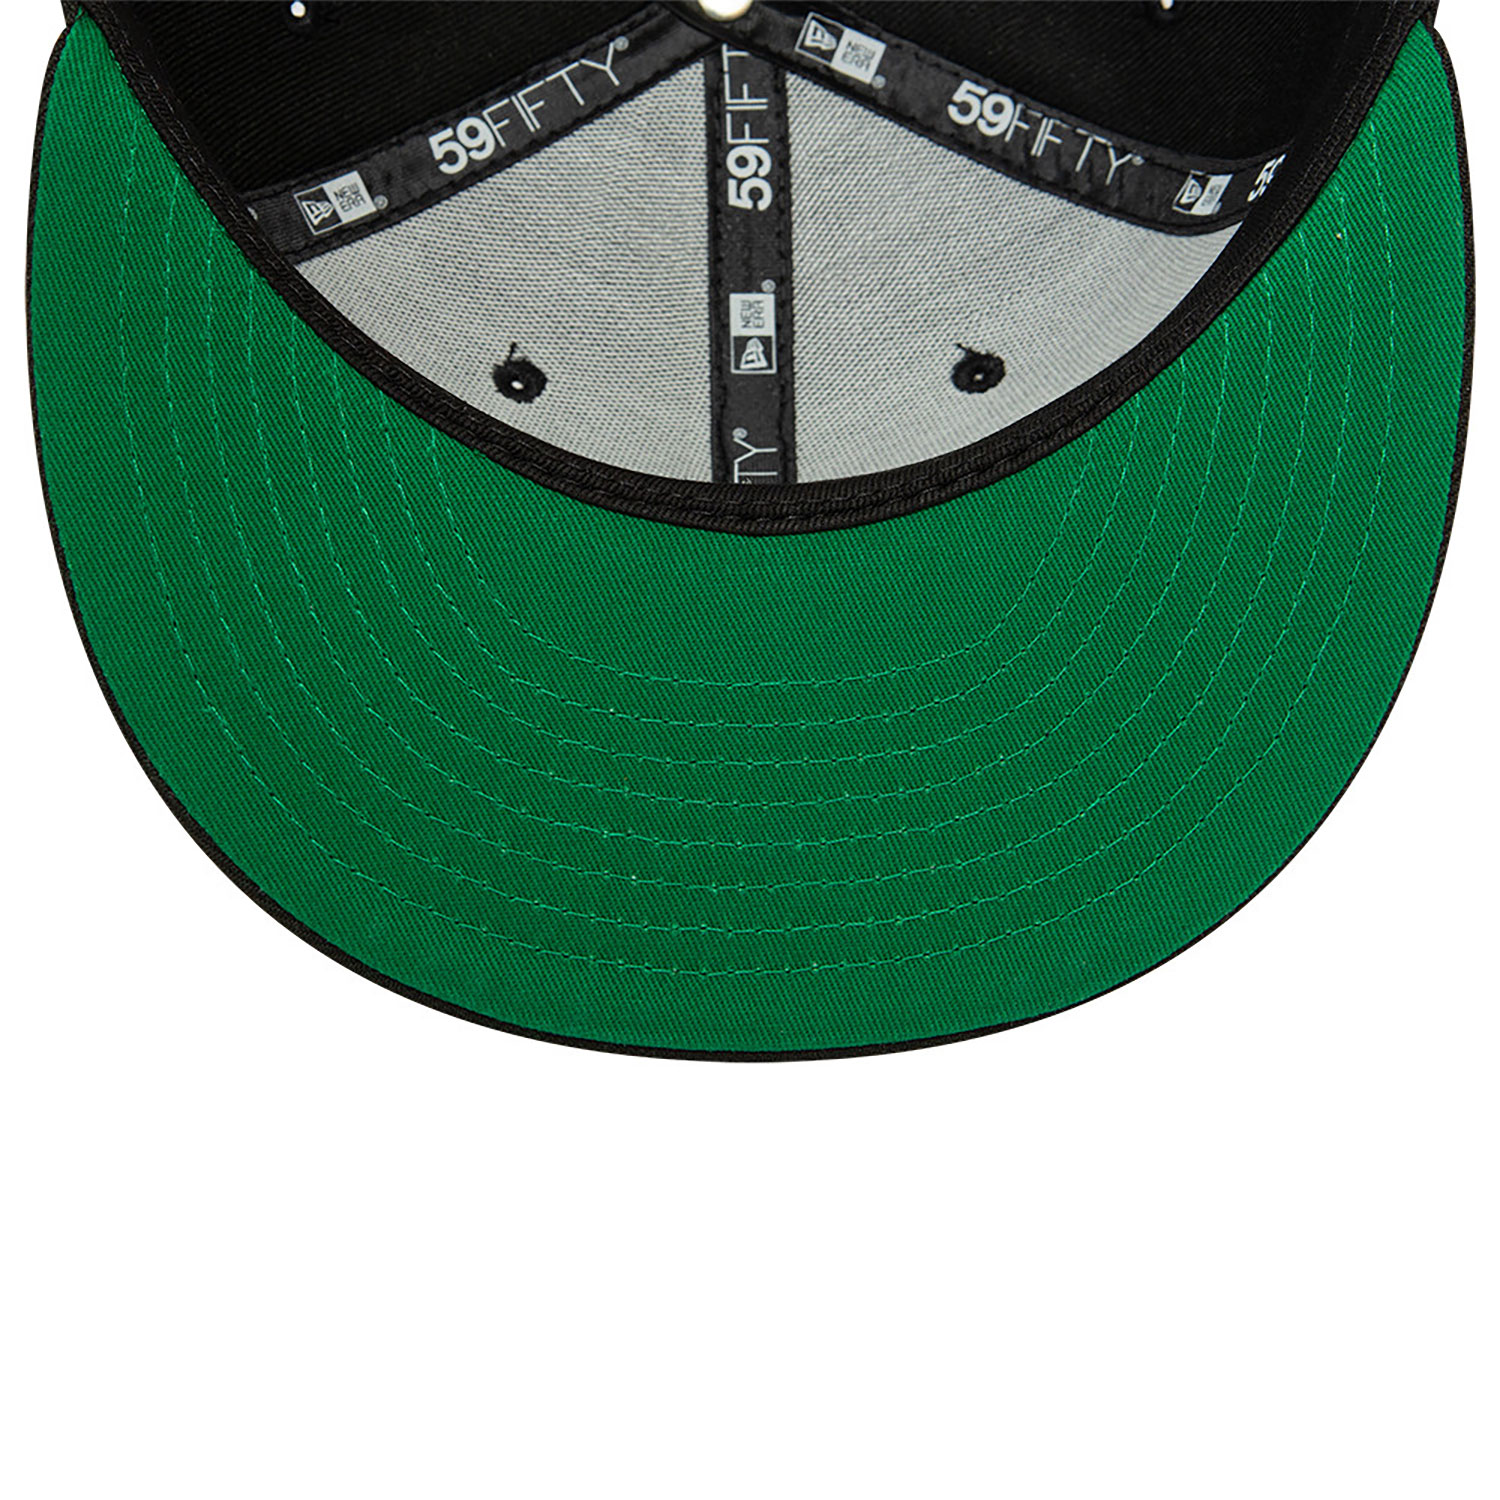 New Era Essential Black 59FIFTY Fitted Cap